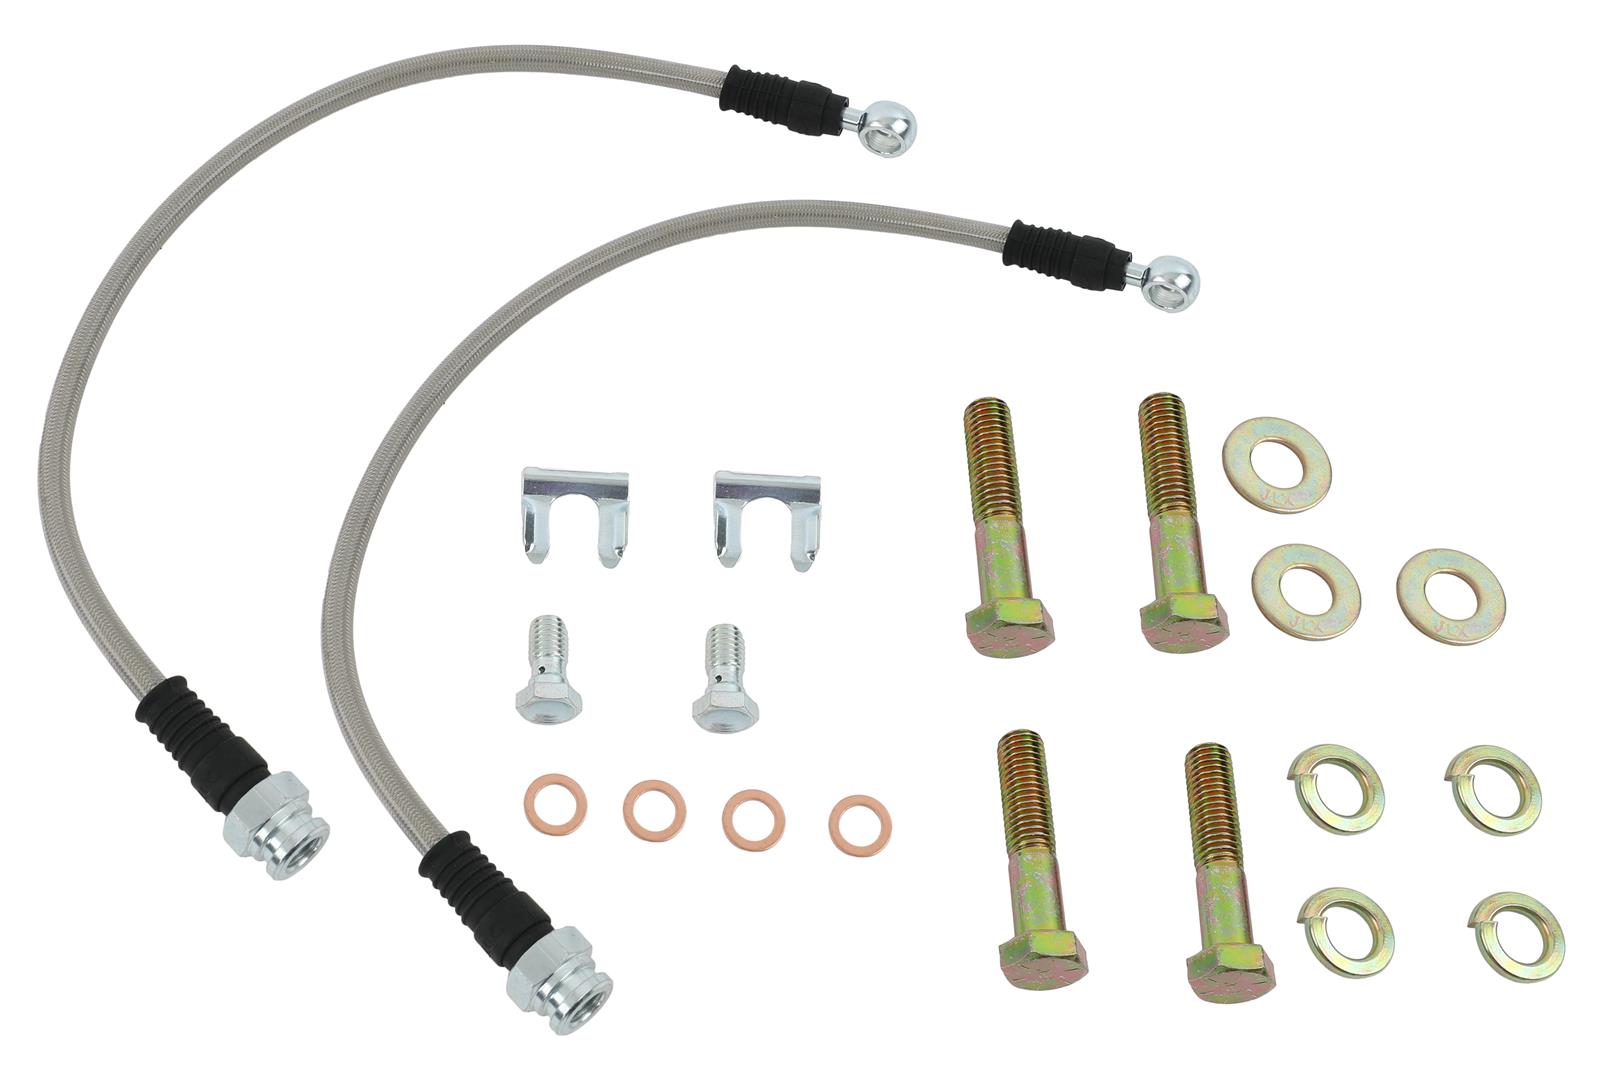 Brake Line kit Chevrolet cars 1941 to 1950 Tell Us What You Have